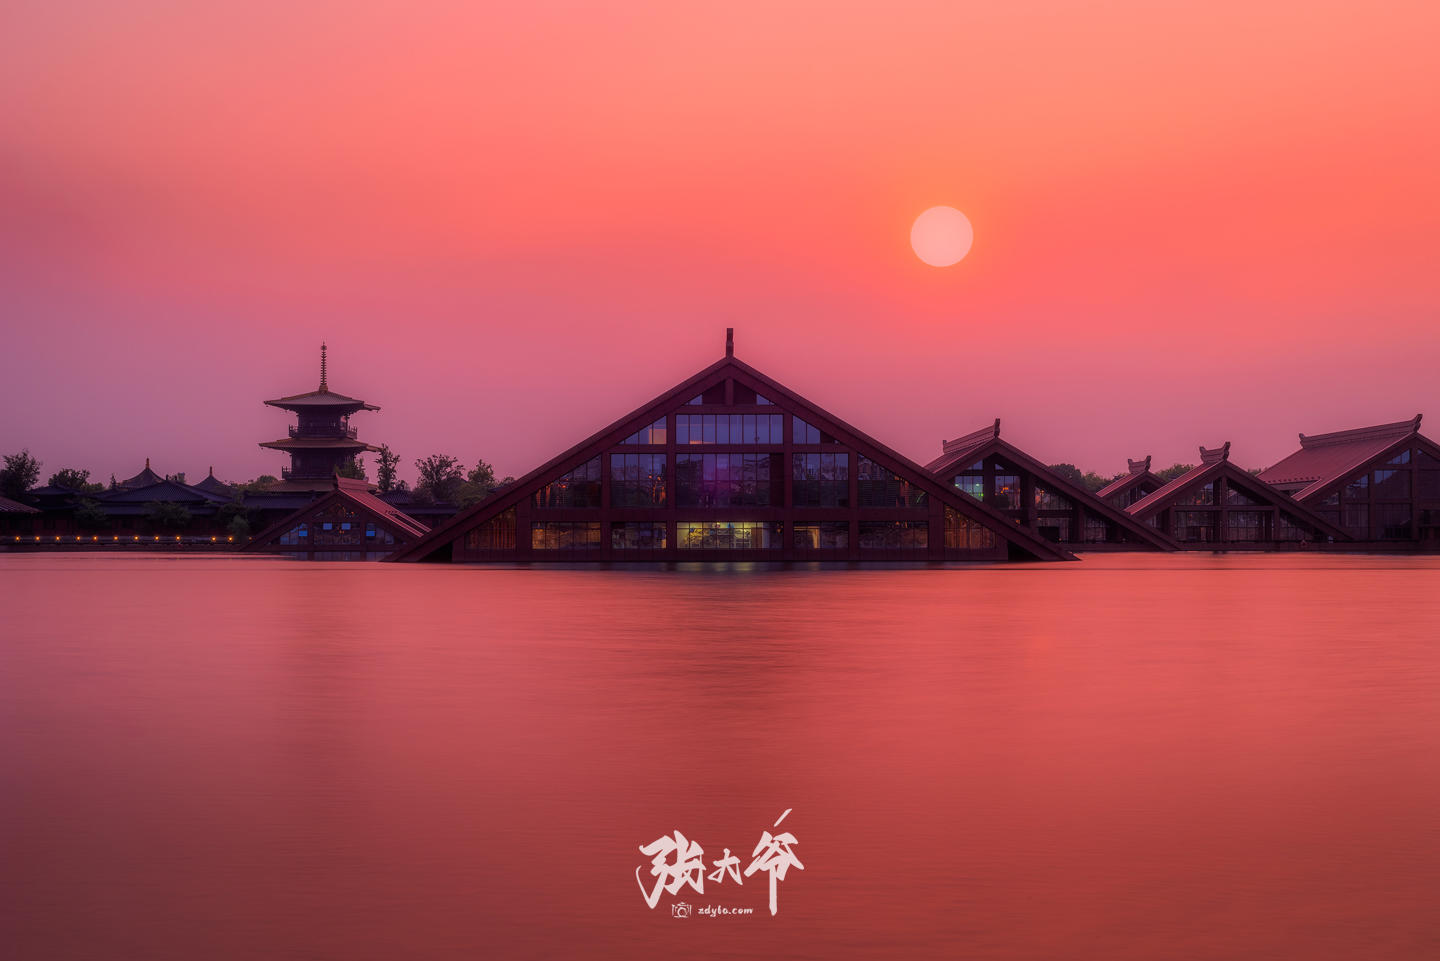 The Sunset in Guangfulin